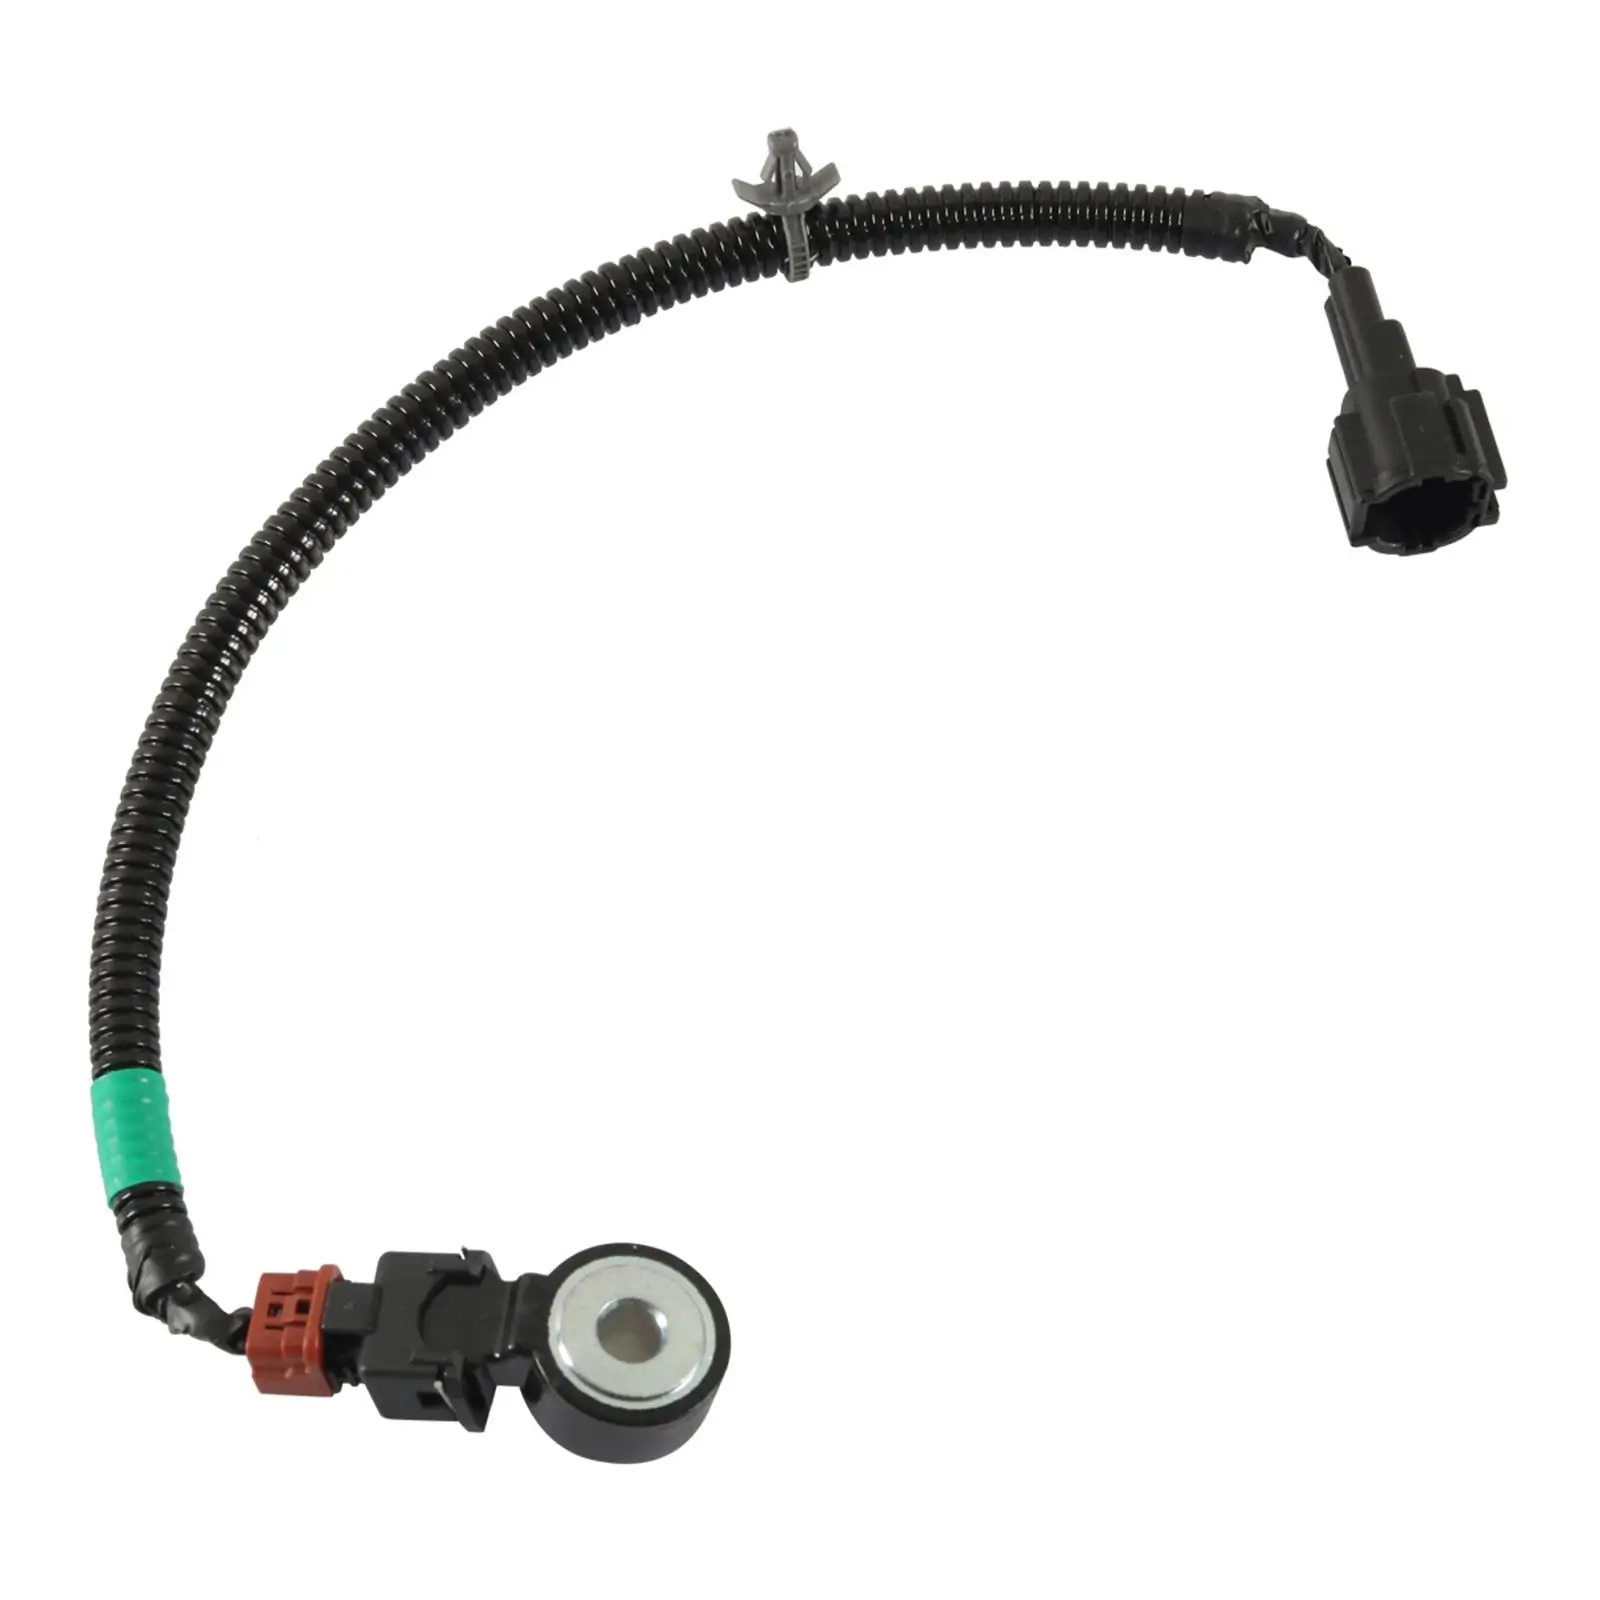 Knock Sensor and Wiring Harness 2407931U01 Fit for Nissan Parts Replace Accessories Easy to Install